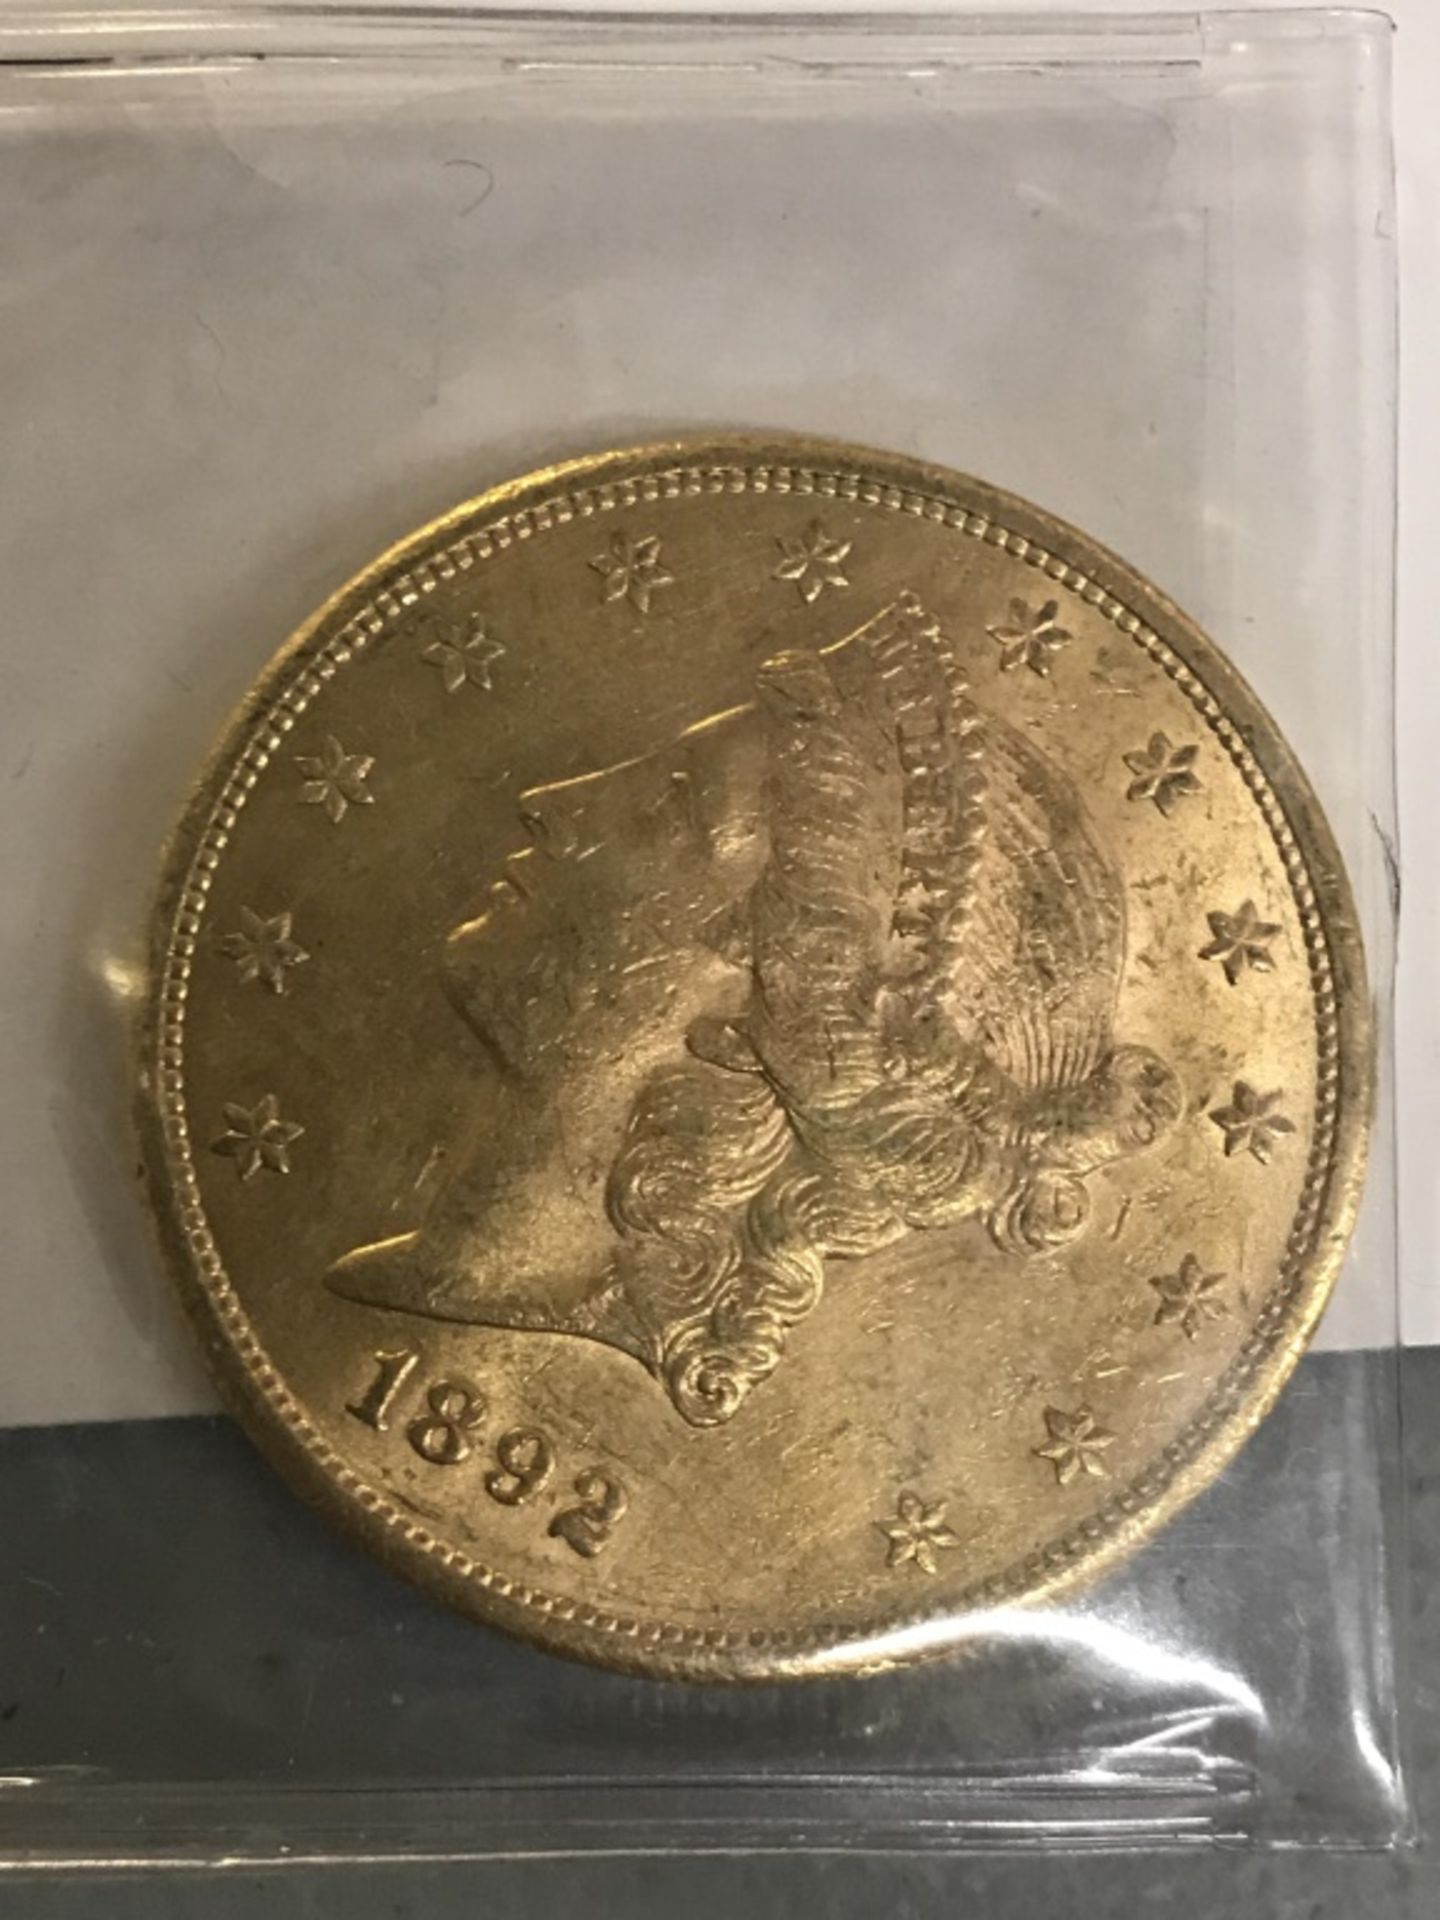 $20 Us Gold 1892 Coin